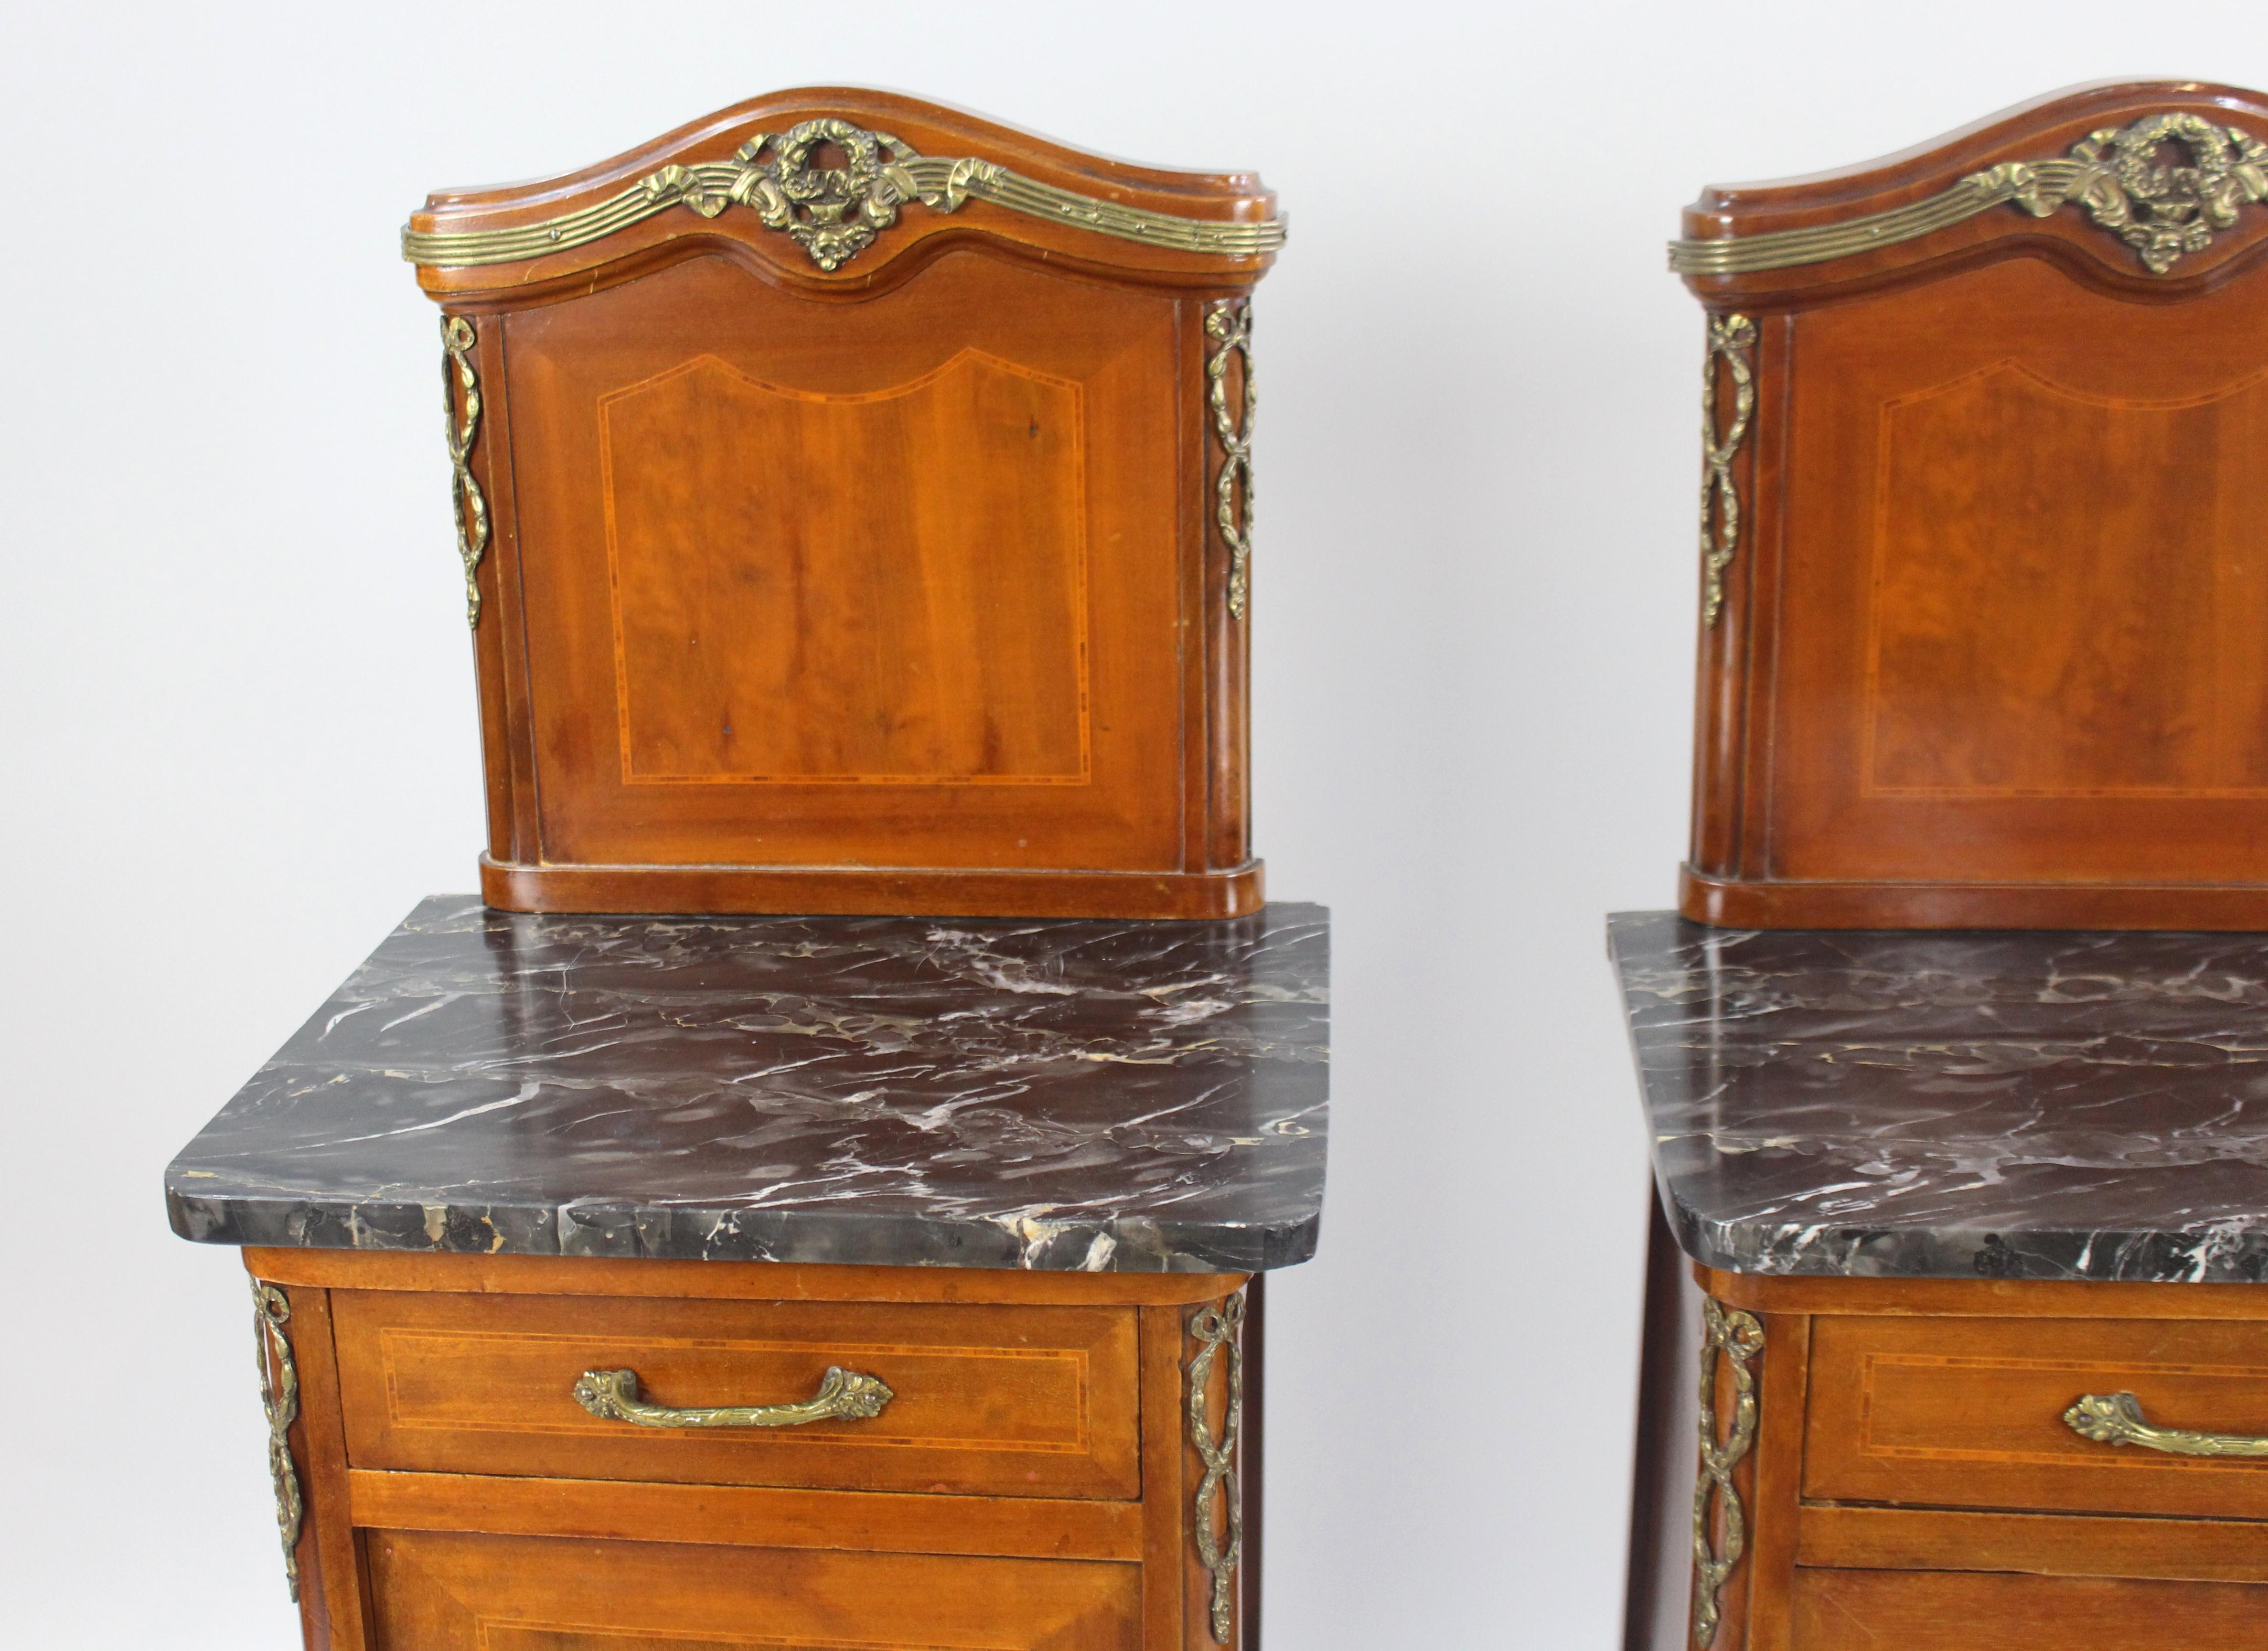 Period: 
Victorian

Wood:
Mahogany, inlaid

Top: 
Heavy moulded marble tops

Condition: 
Good condition commensurate with age. Repair to corner of one of the marble tops
 

 

Pair of 19th century English bedside cabinets.

Brass